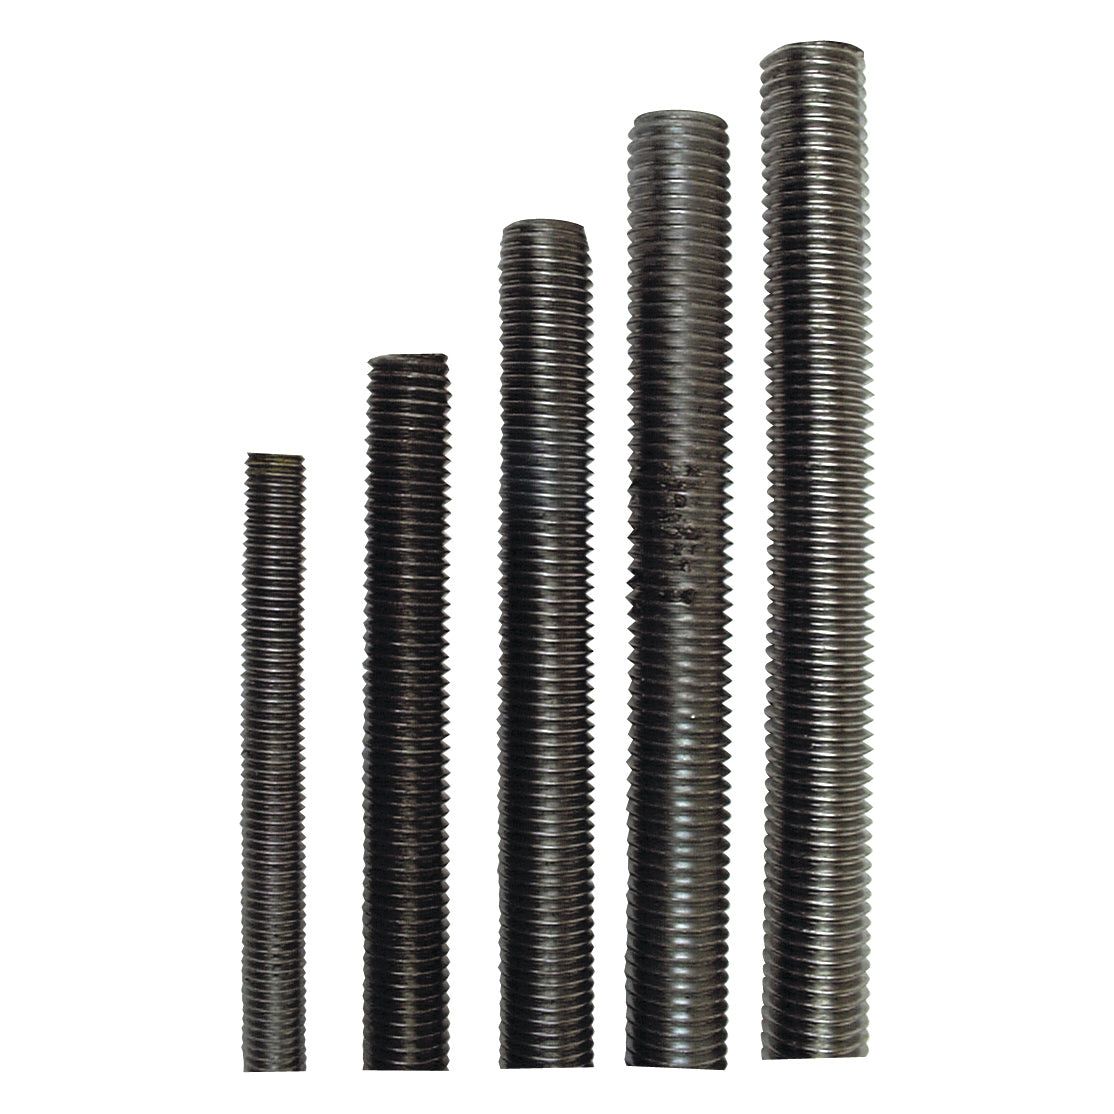 Metric Threaded Bar, Size:⌀22mm, Length: 1M, Tensile strength: 8.8.
 - S.8818 - Farming Parts